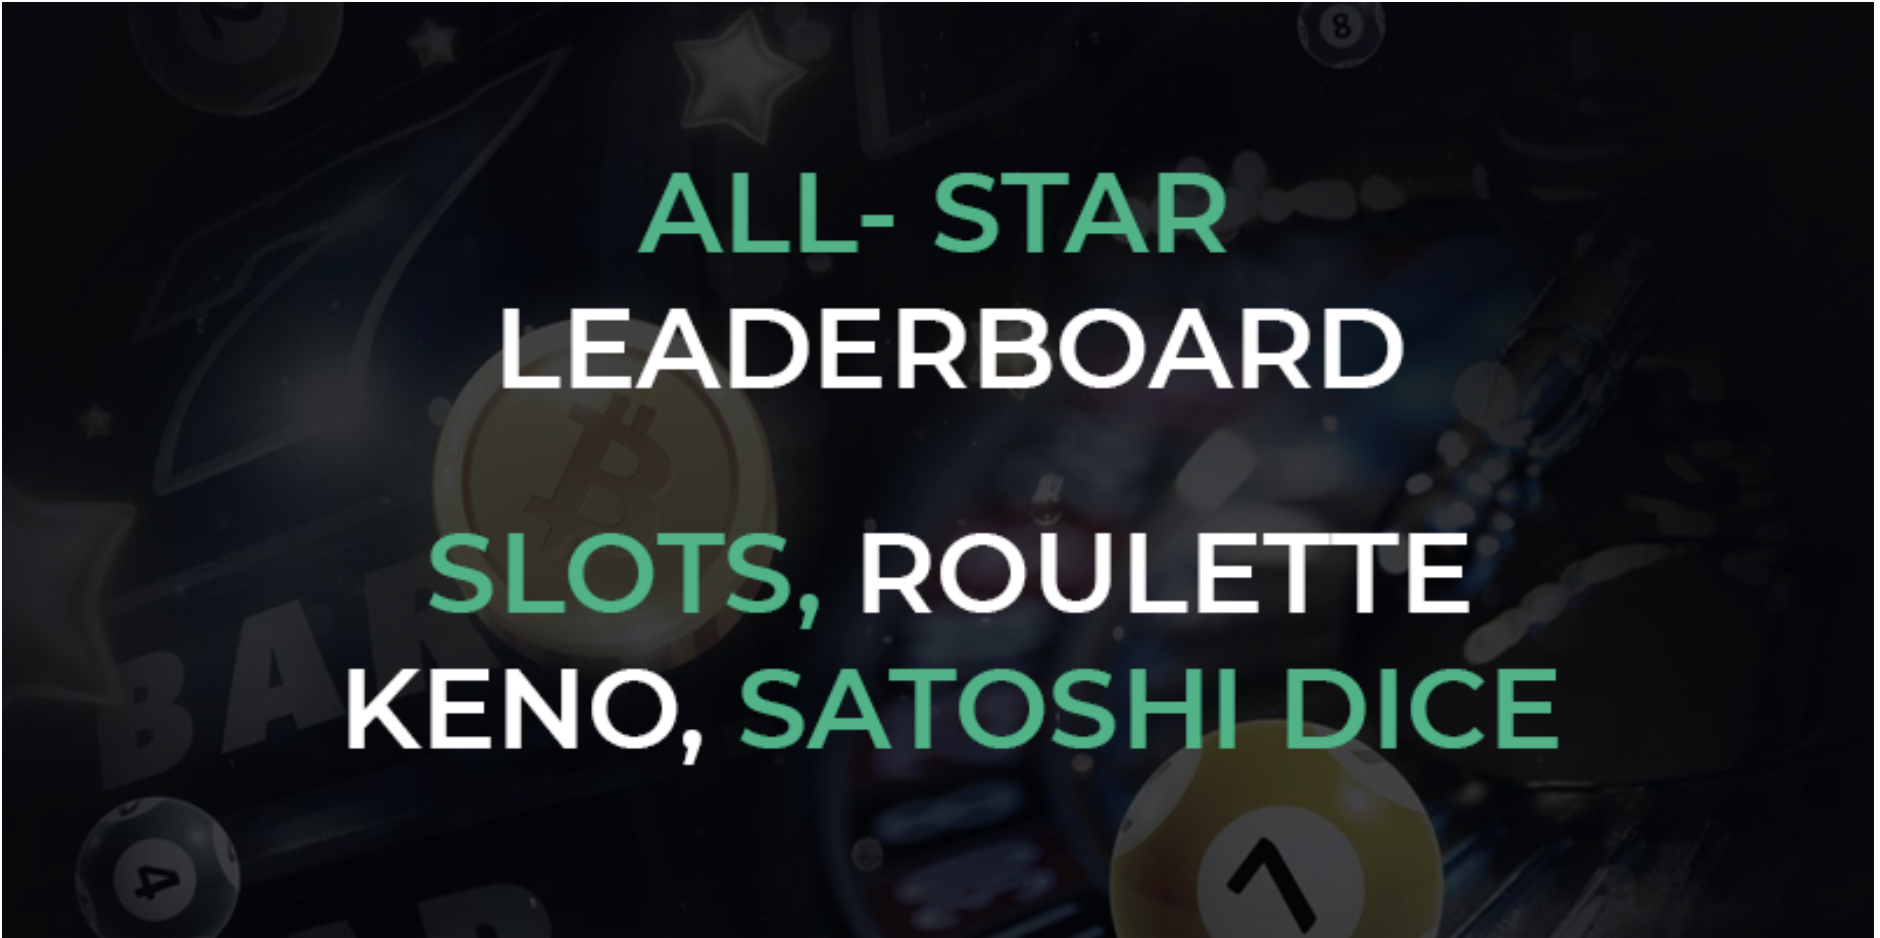 Bitscoins.net Launches Games Stars Leaderboard – Win BTC Every Week